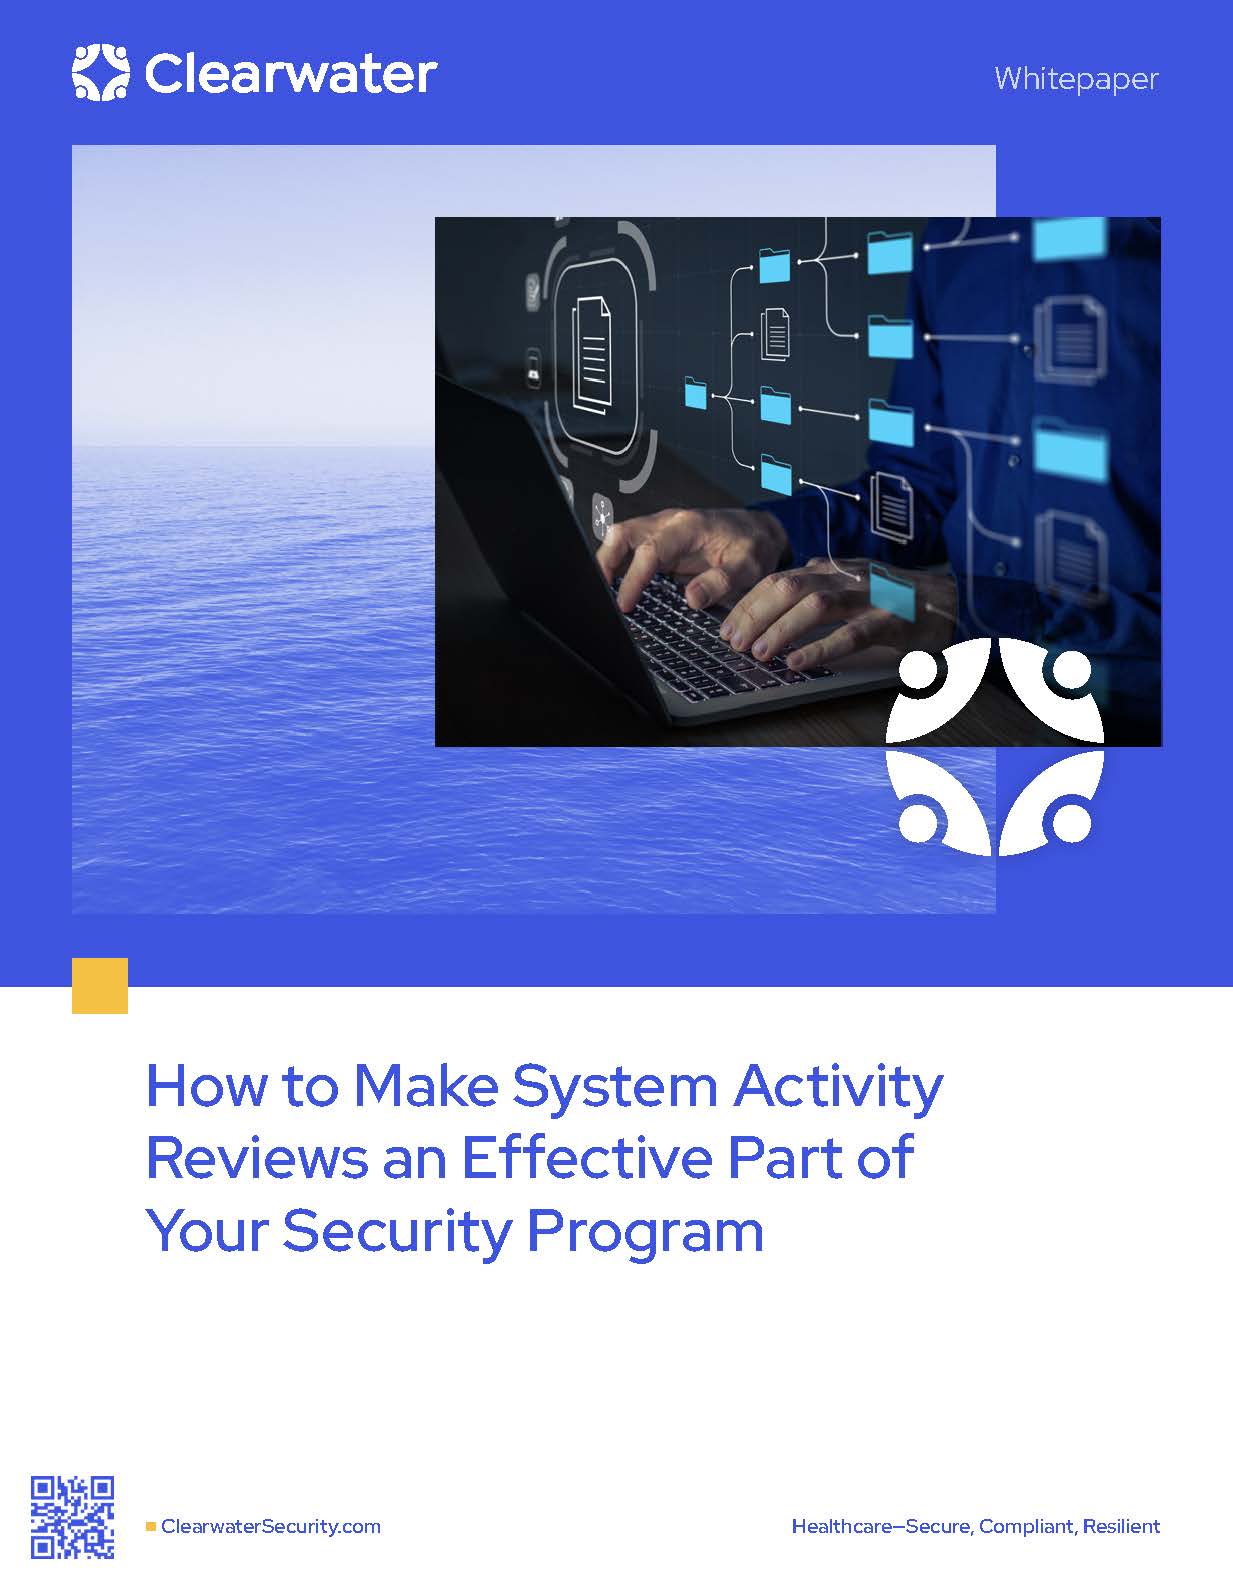 How to Make System Activity Reviews an Effective Part of Your Security Program by Clearwater